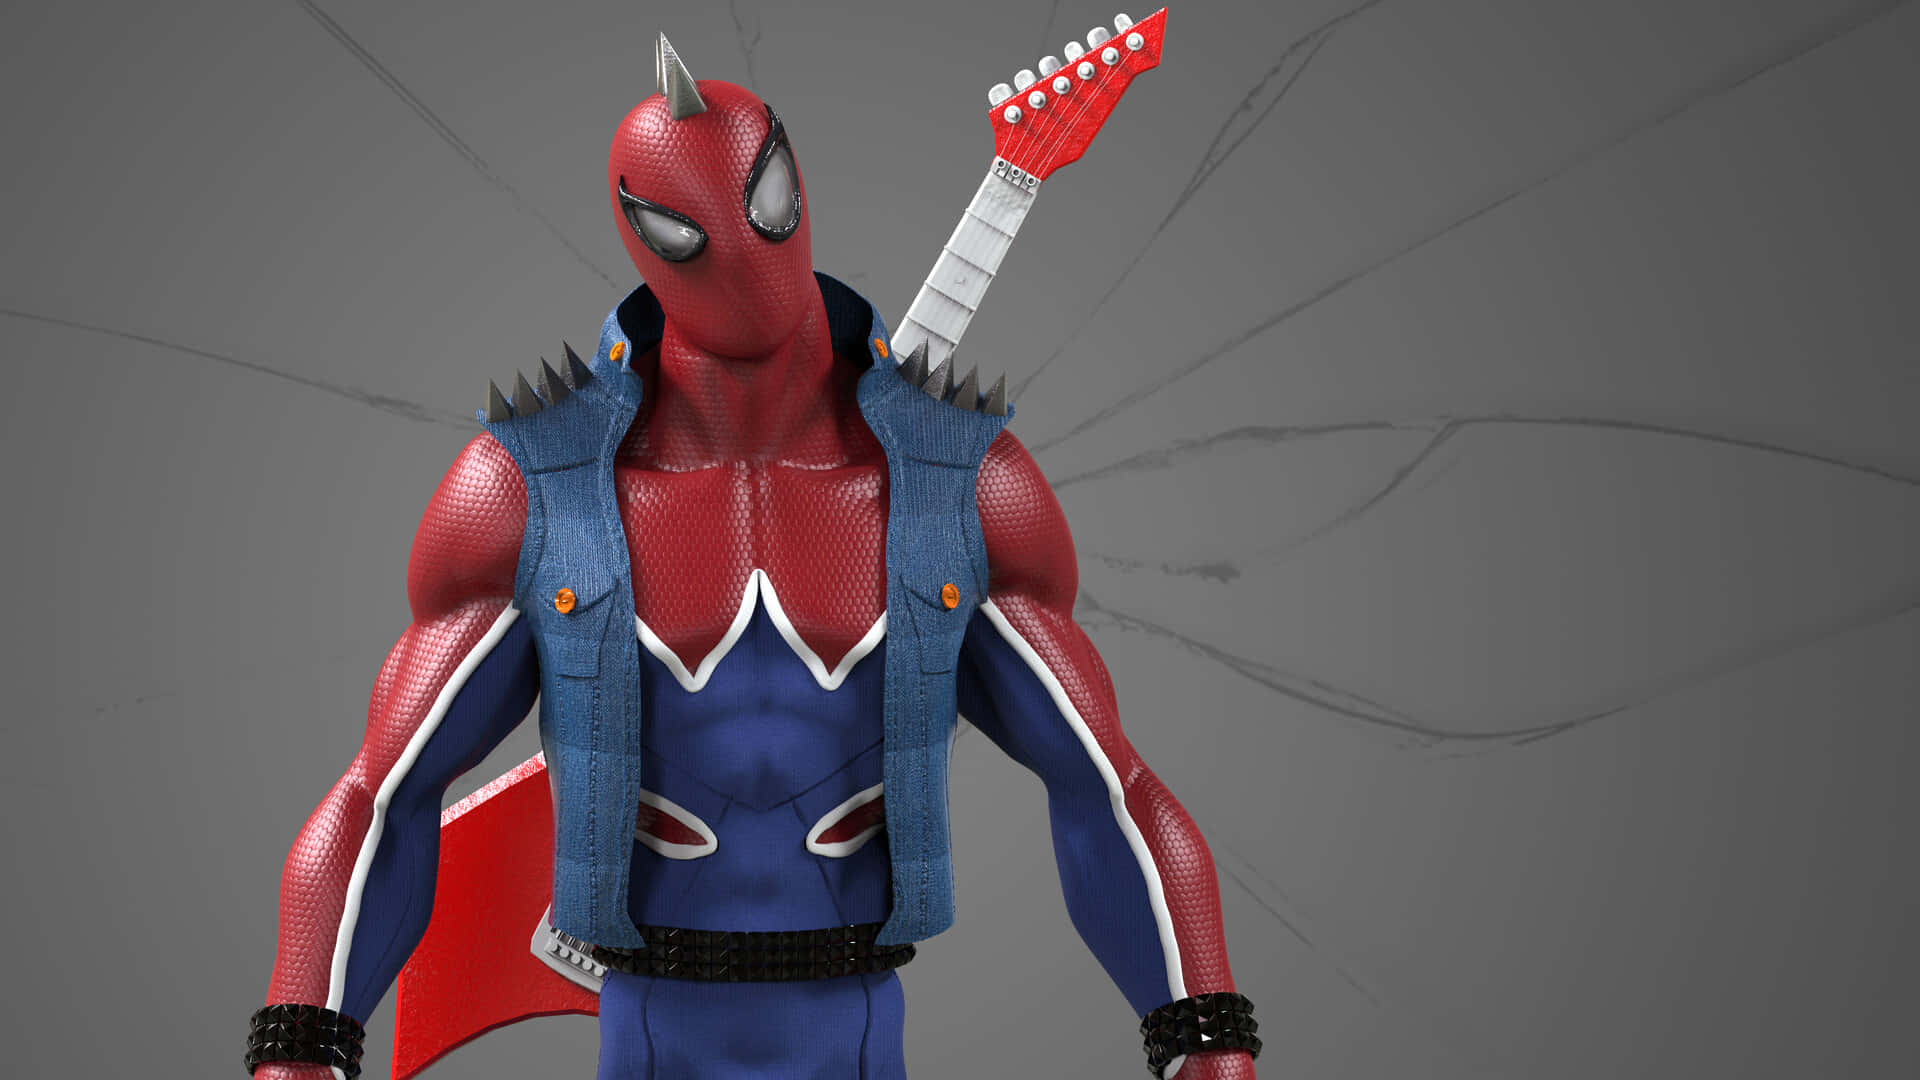 Spider Punk Figure With Guitar Wallpaper